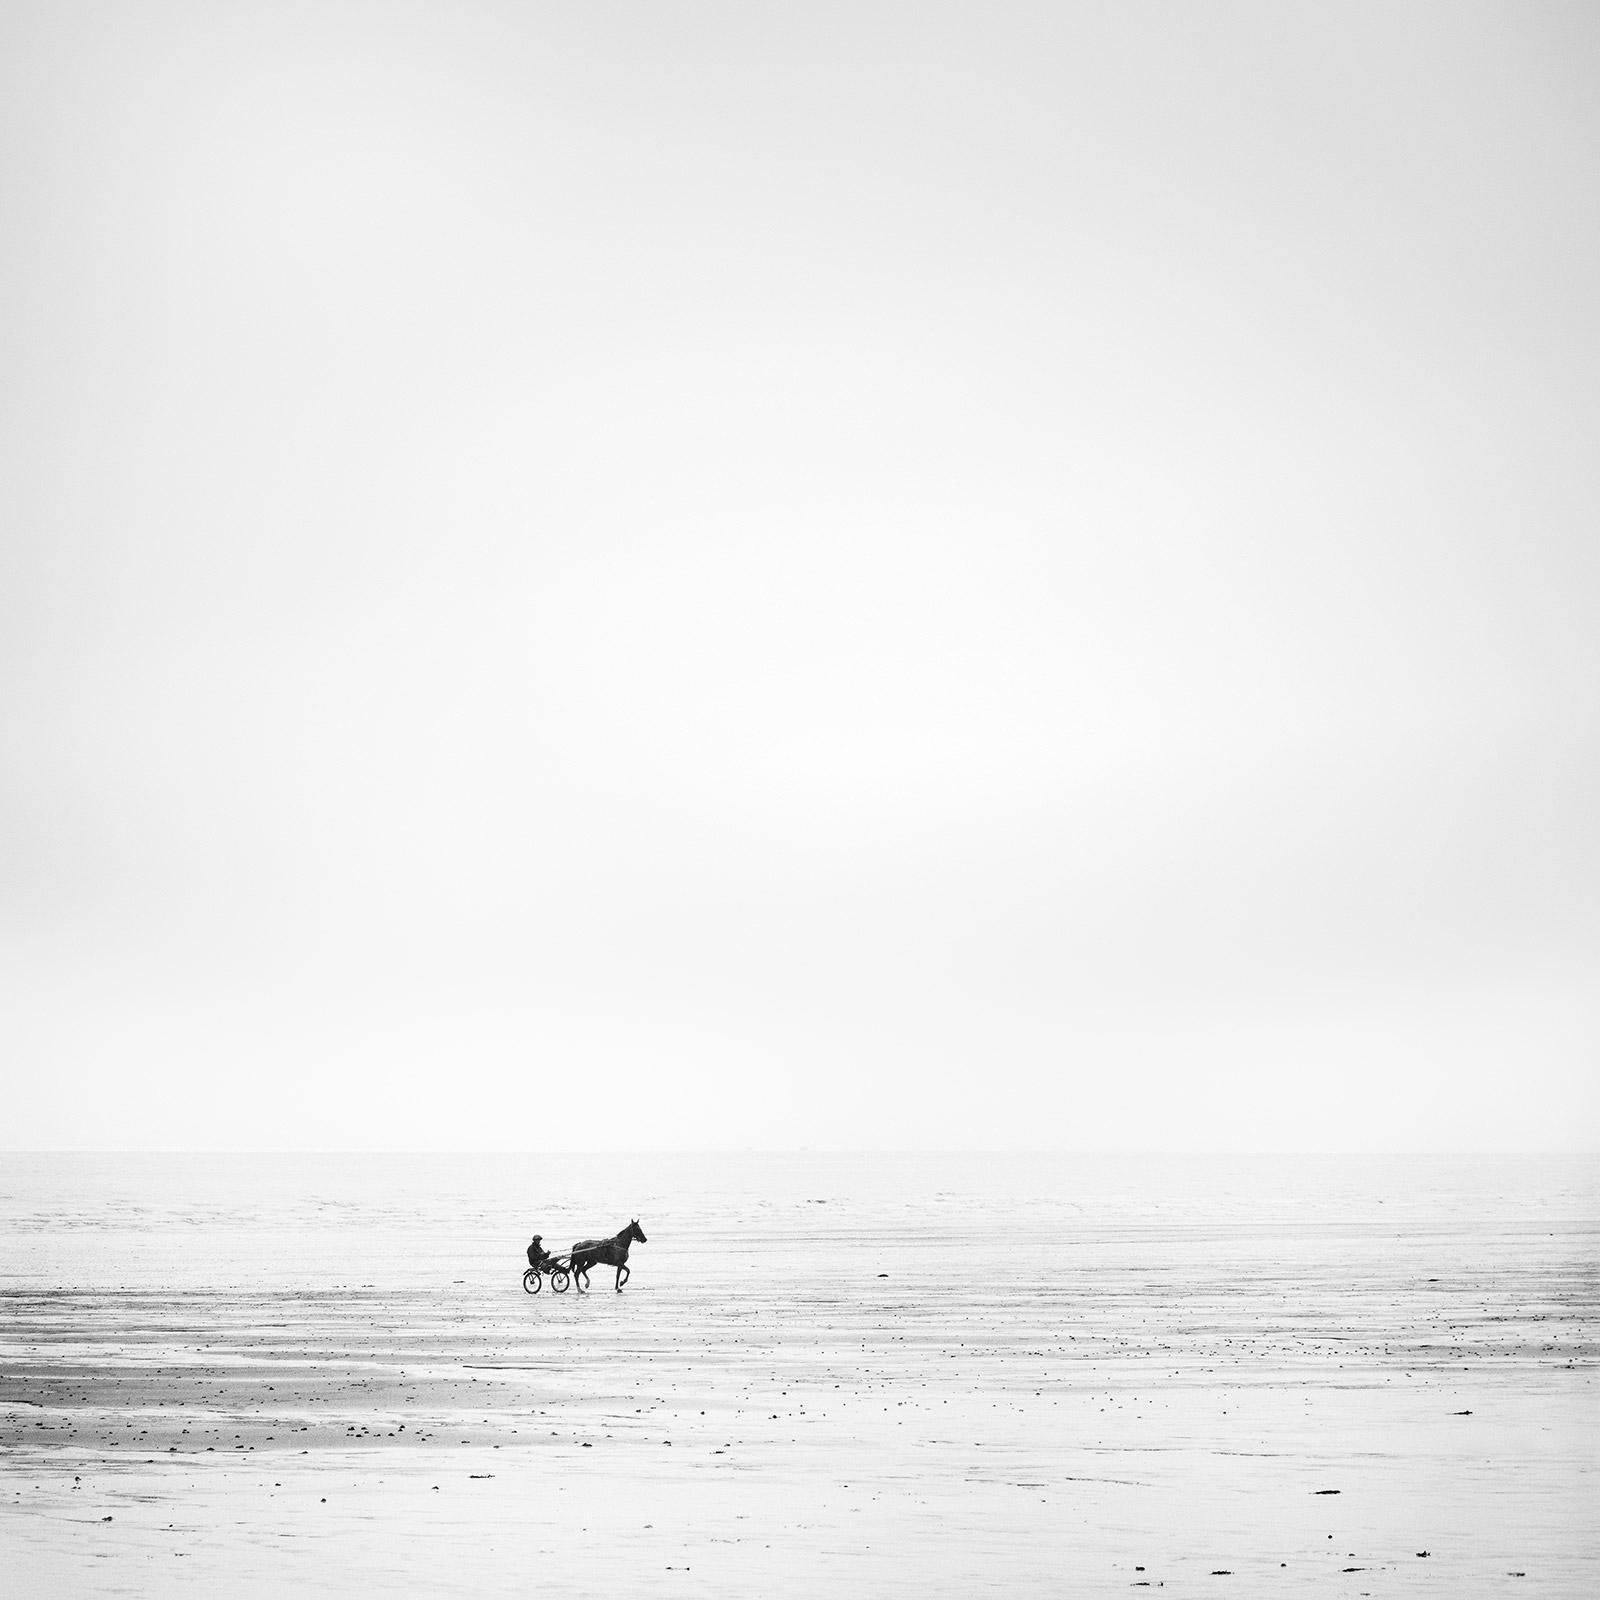 Gerald Berghammer Landscape Photograph - Harness Racing lonely beach horse minimalist black white landscape photography